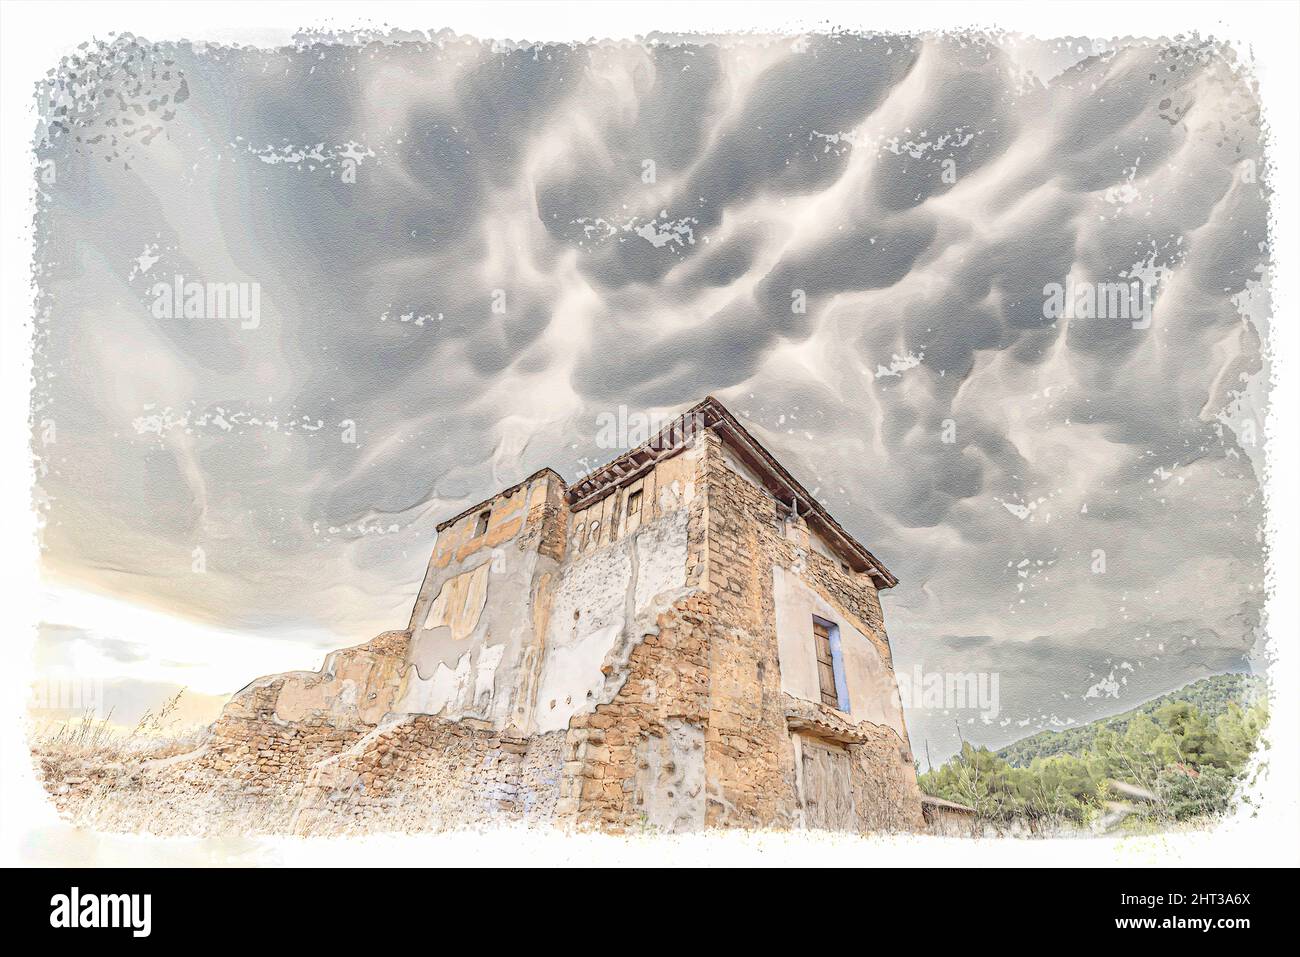 Clouds and cumulus in stormy sky with abandoned house in the countryside, gloomy Stock Photo